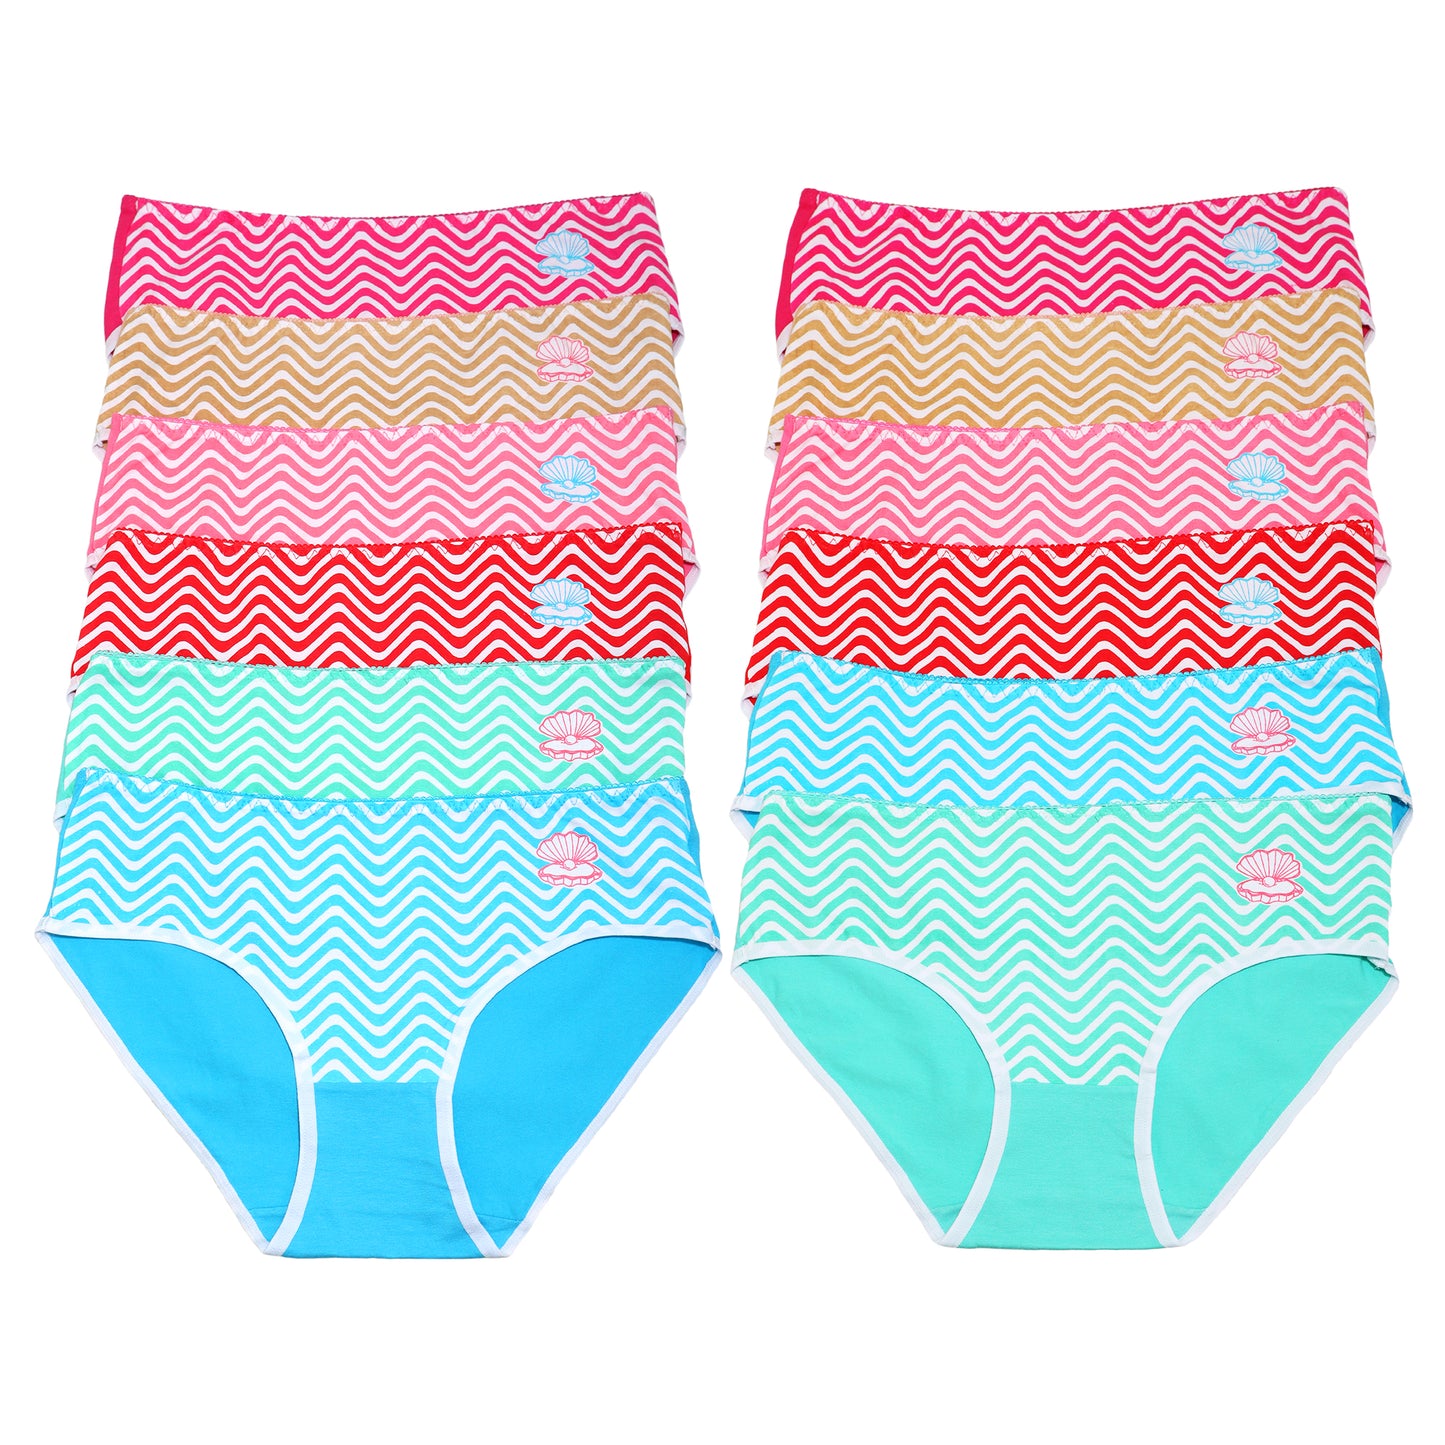 Angelina Cotton Hiphugger Panties with Wave Print Design (12-Pack), #G6632